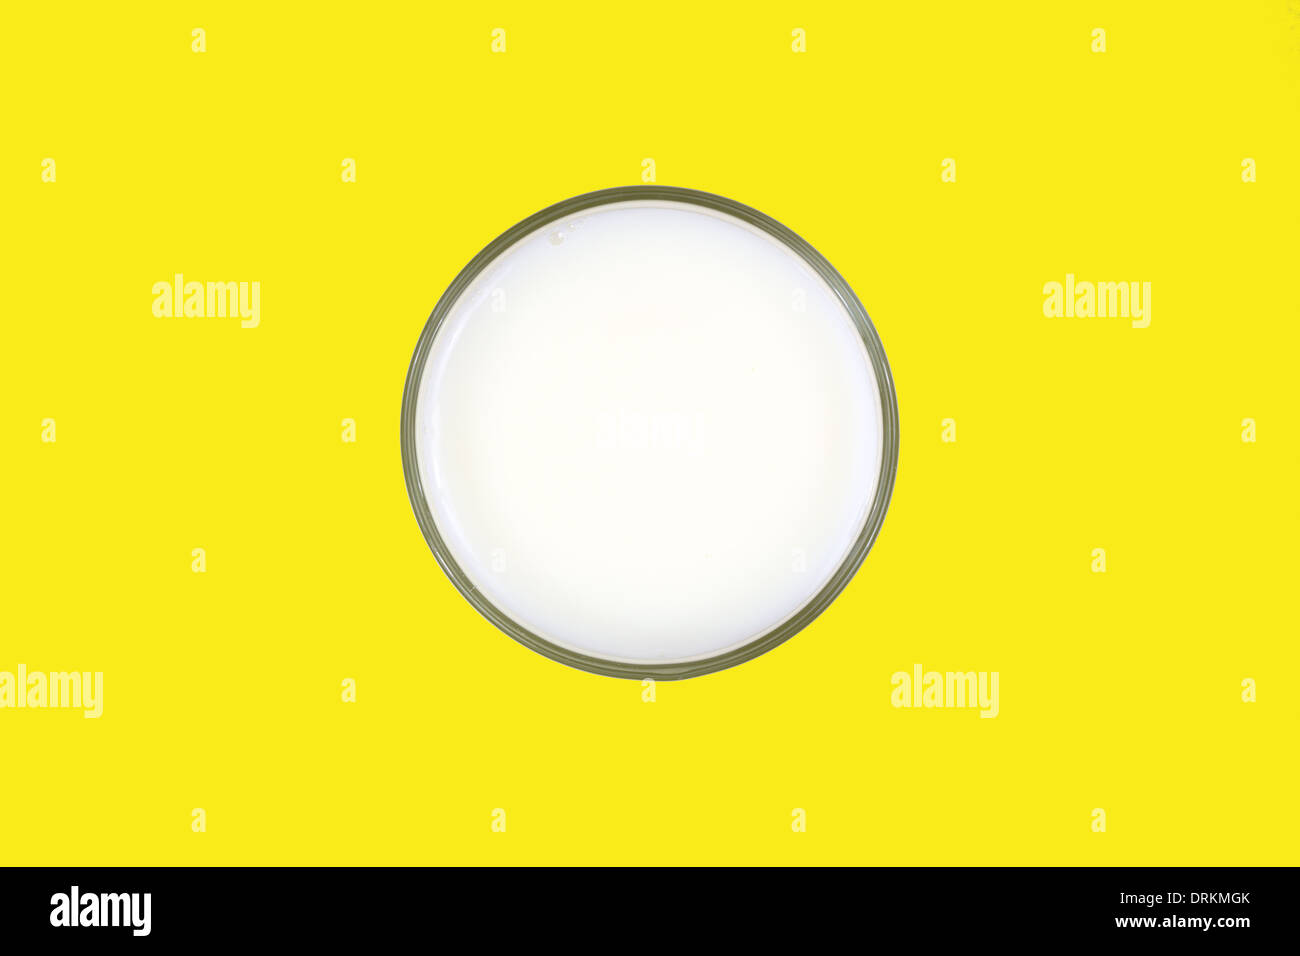 Top view of a glass of skim milk on a bright yellow background. Stock Photo